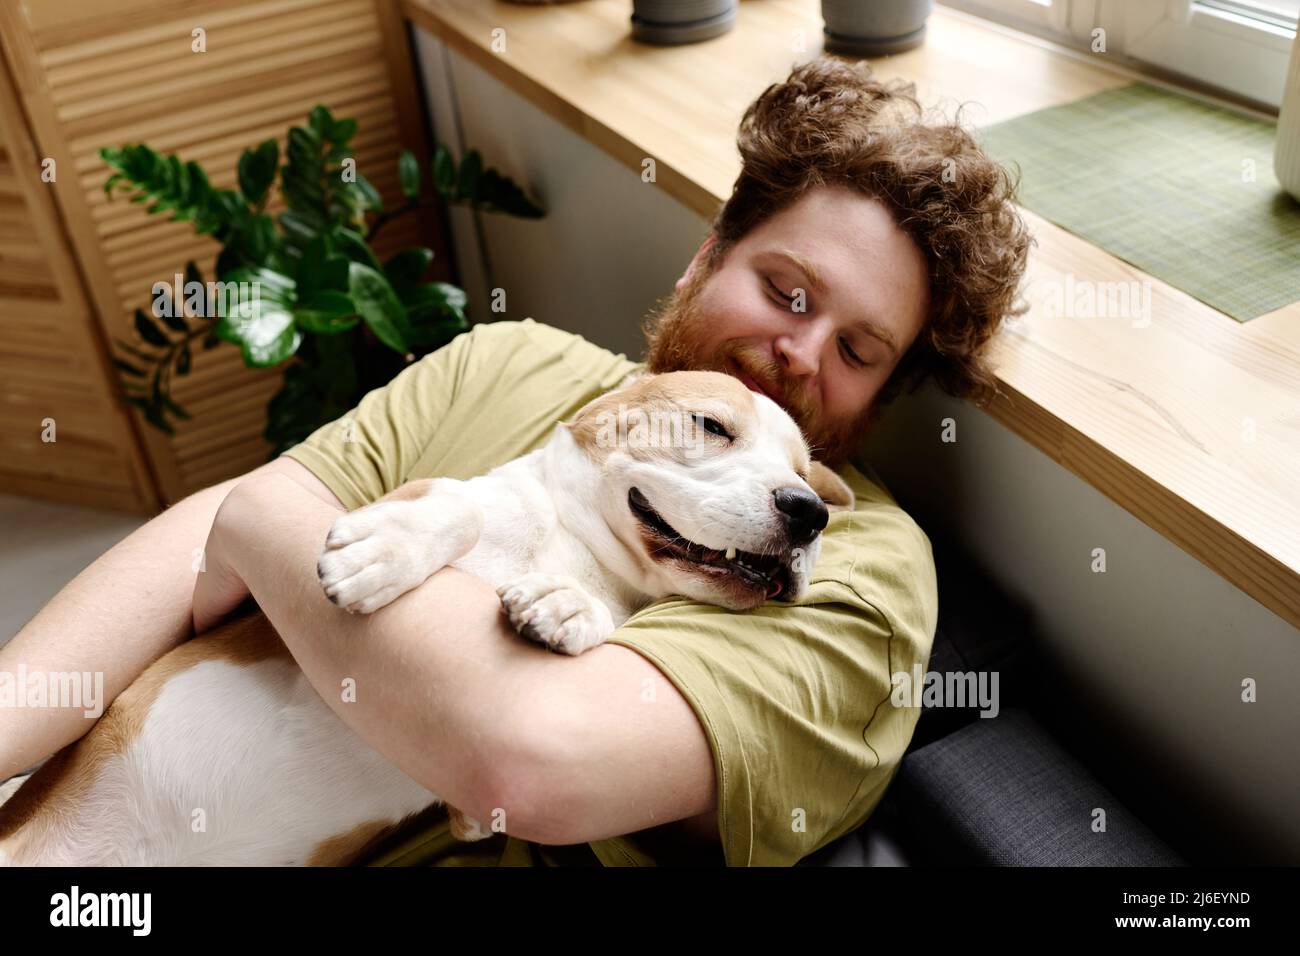 Young bearded man lying on bed and holding his sleeping dog on arms during rest time in bedroom Stock Photo